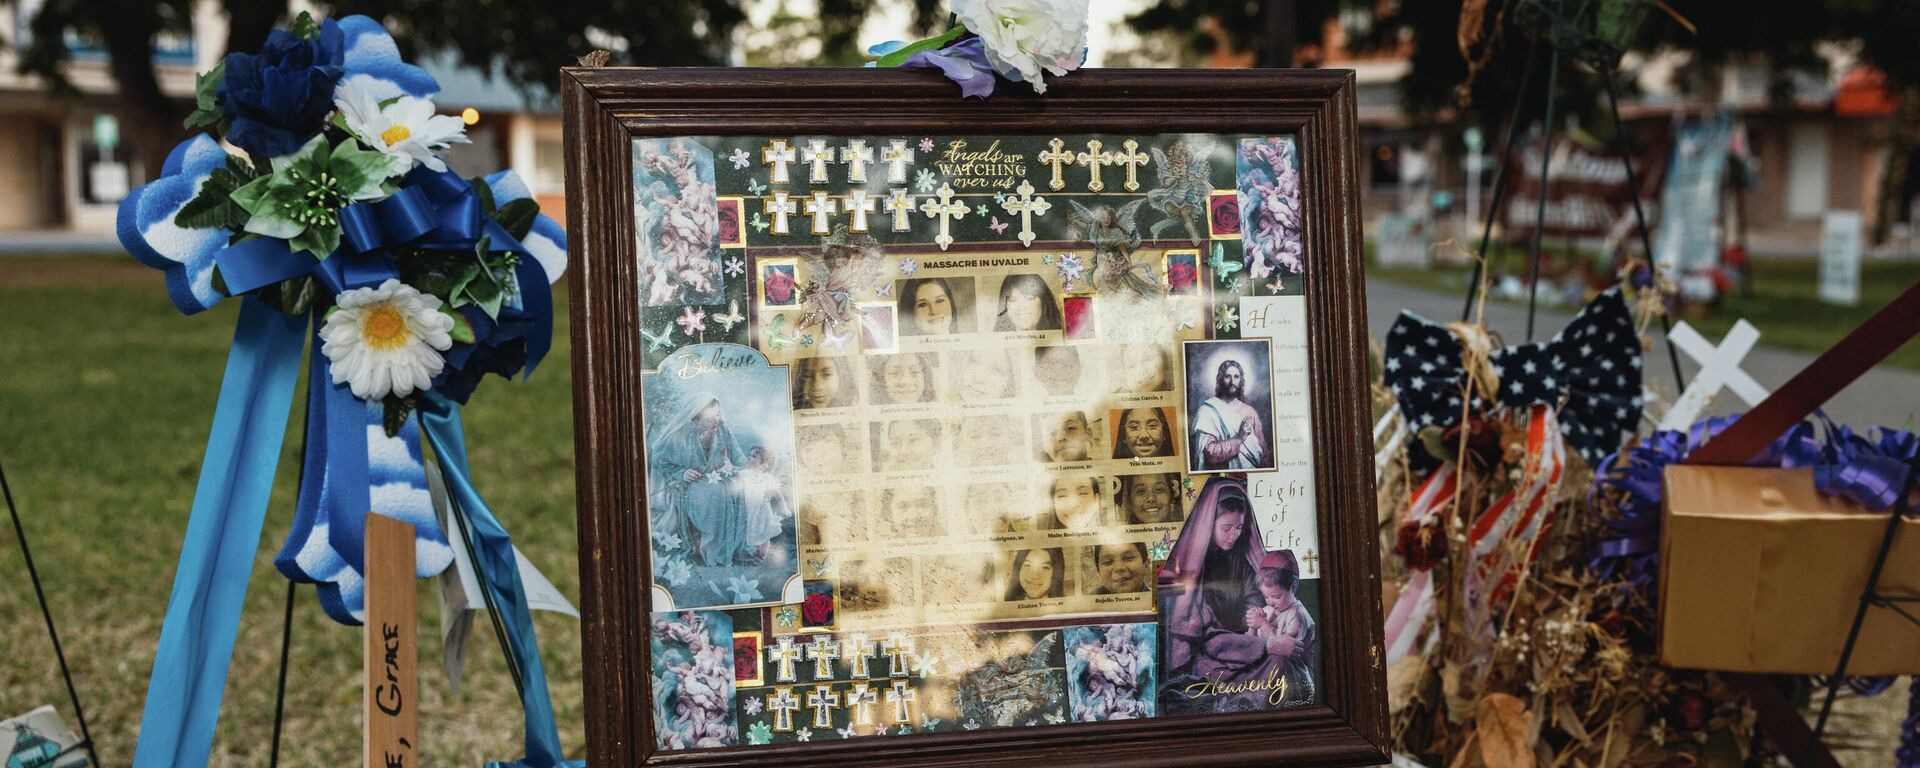 A framed picture is adorned with flowers and crosses at a memorial for the victims of the mass shooting at Robb Elementary School on June 25, 2022 in Uvalde, Texas. The Uvalde community is marking one month since the deadly shooting where 19 students and 2 teachers were killed.  - Sputnik International, 1920, 21.07.2022